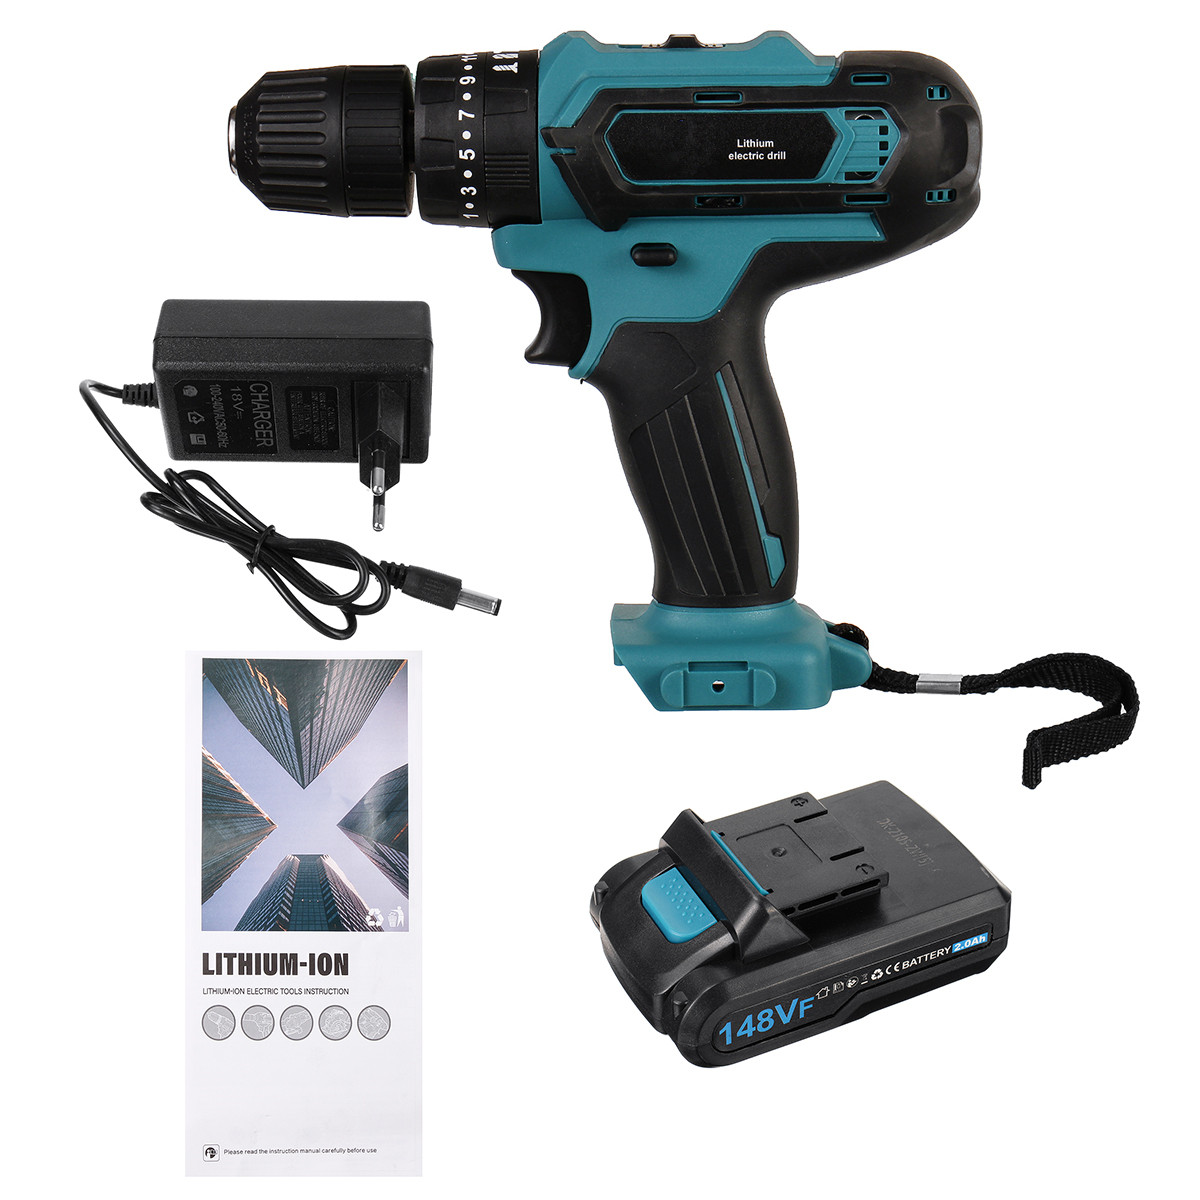 148VF-20Ah-Cordless-Electric-Impact-Drill-Rechargeable-Drill-Screwdriver-W-1-or-2-Li-ion-Battery-1888042-3